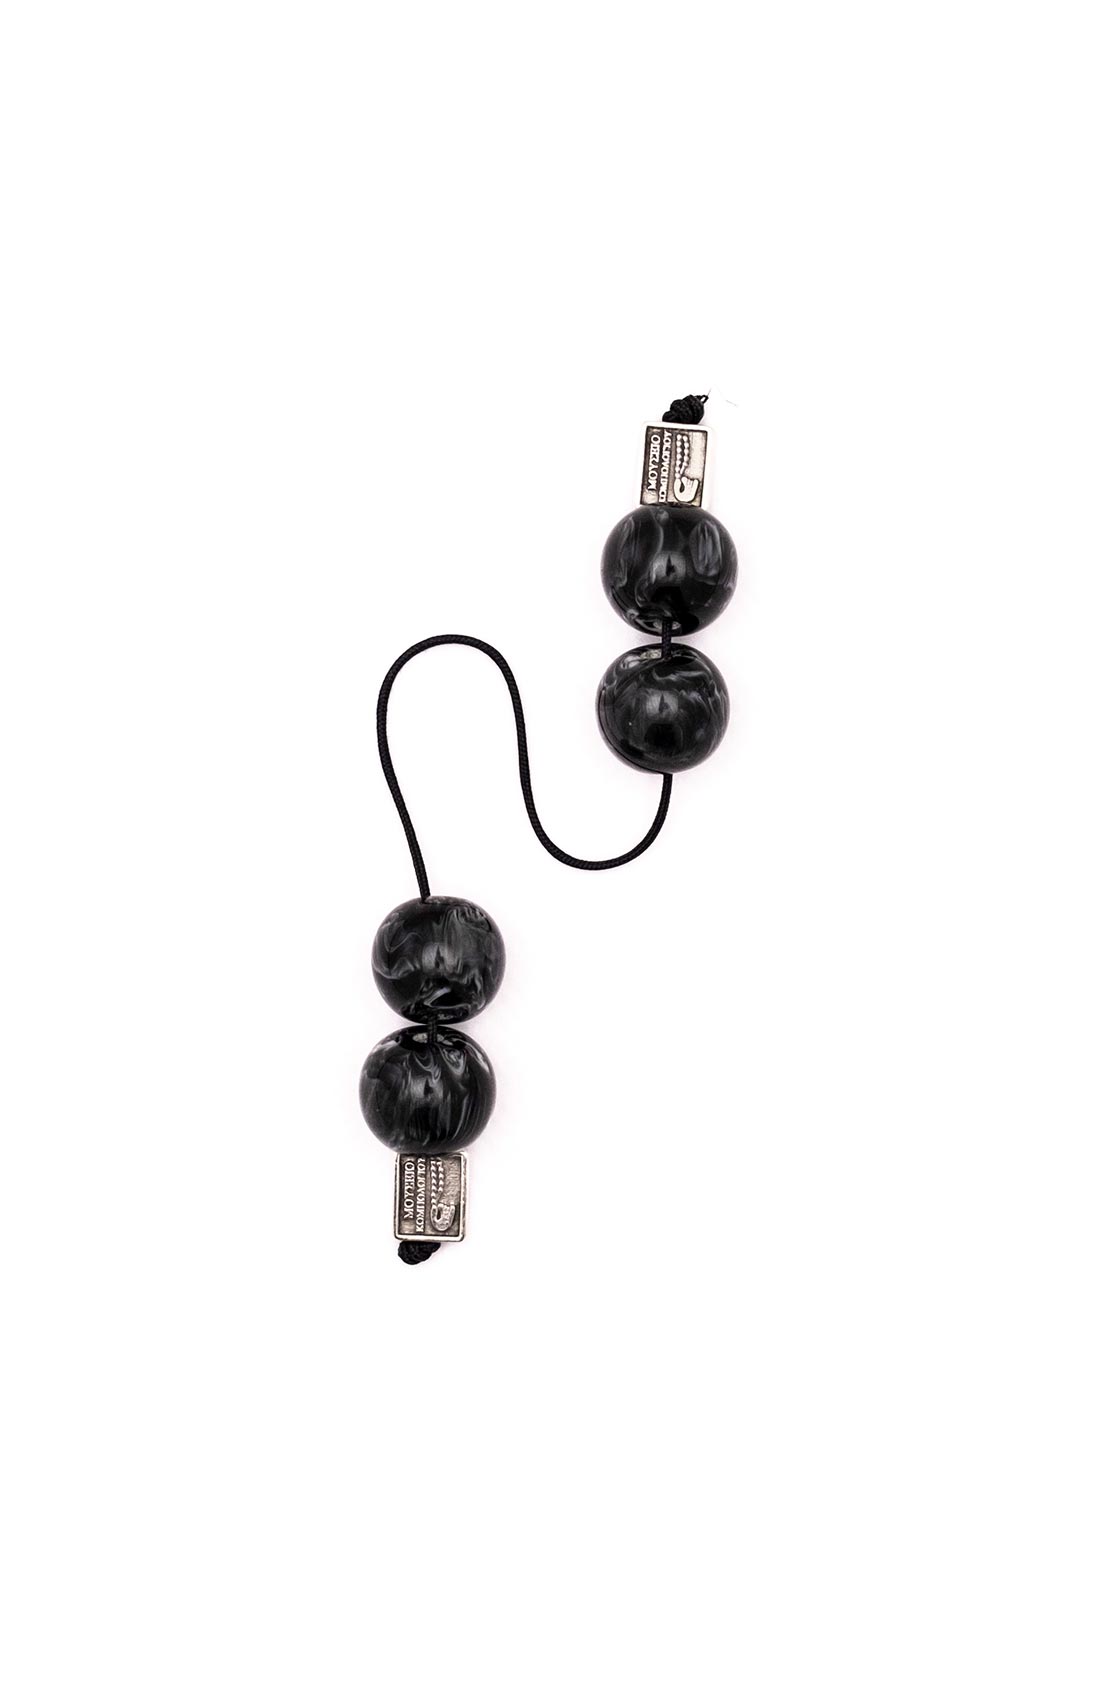 Begleri made of artificial resin (black with water-like shades)